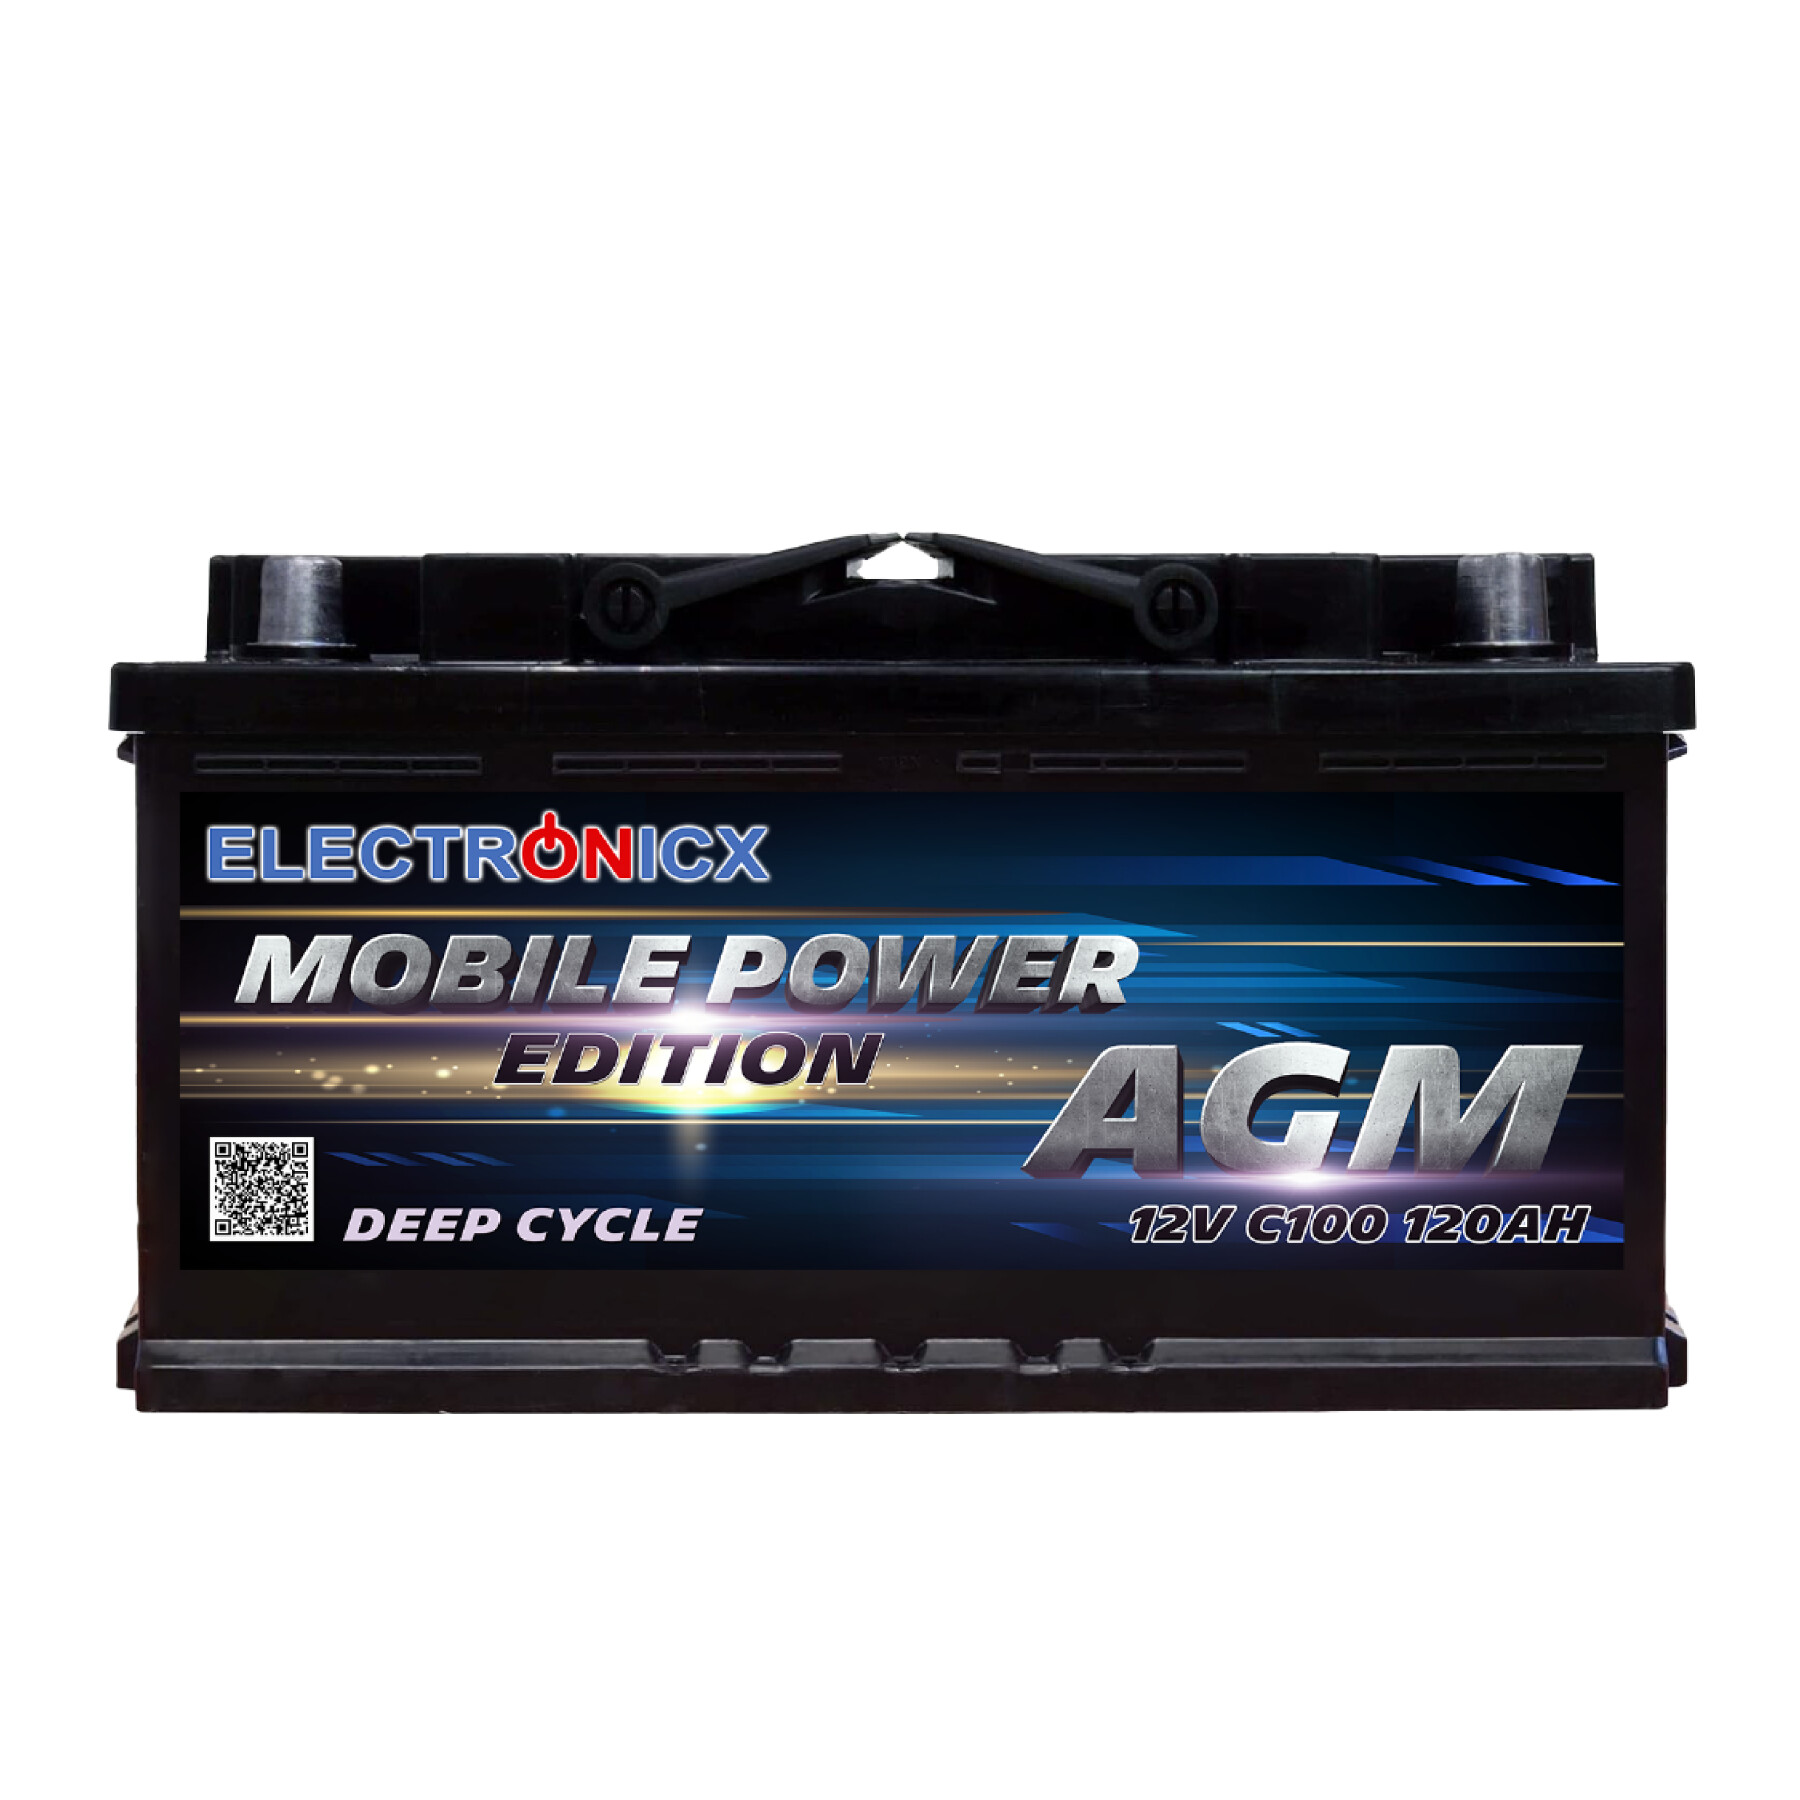 Electronicx Marine Edition Batterie AGM 120 AH 12V Boot Schiff